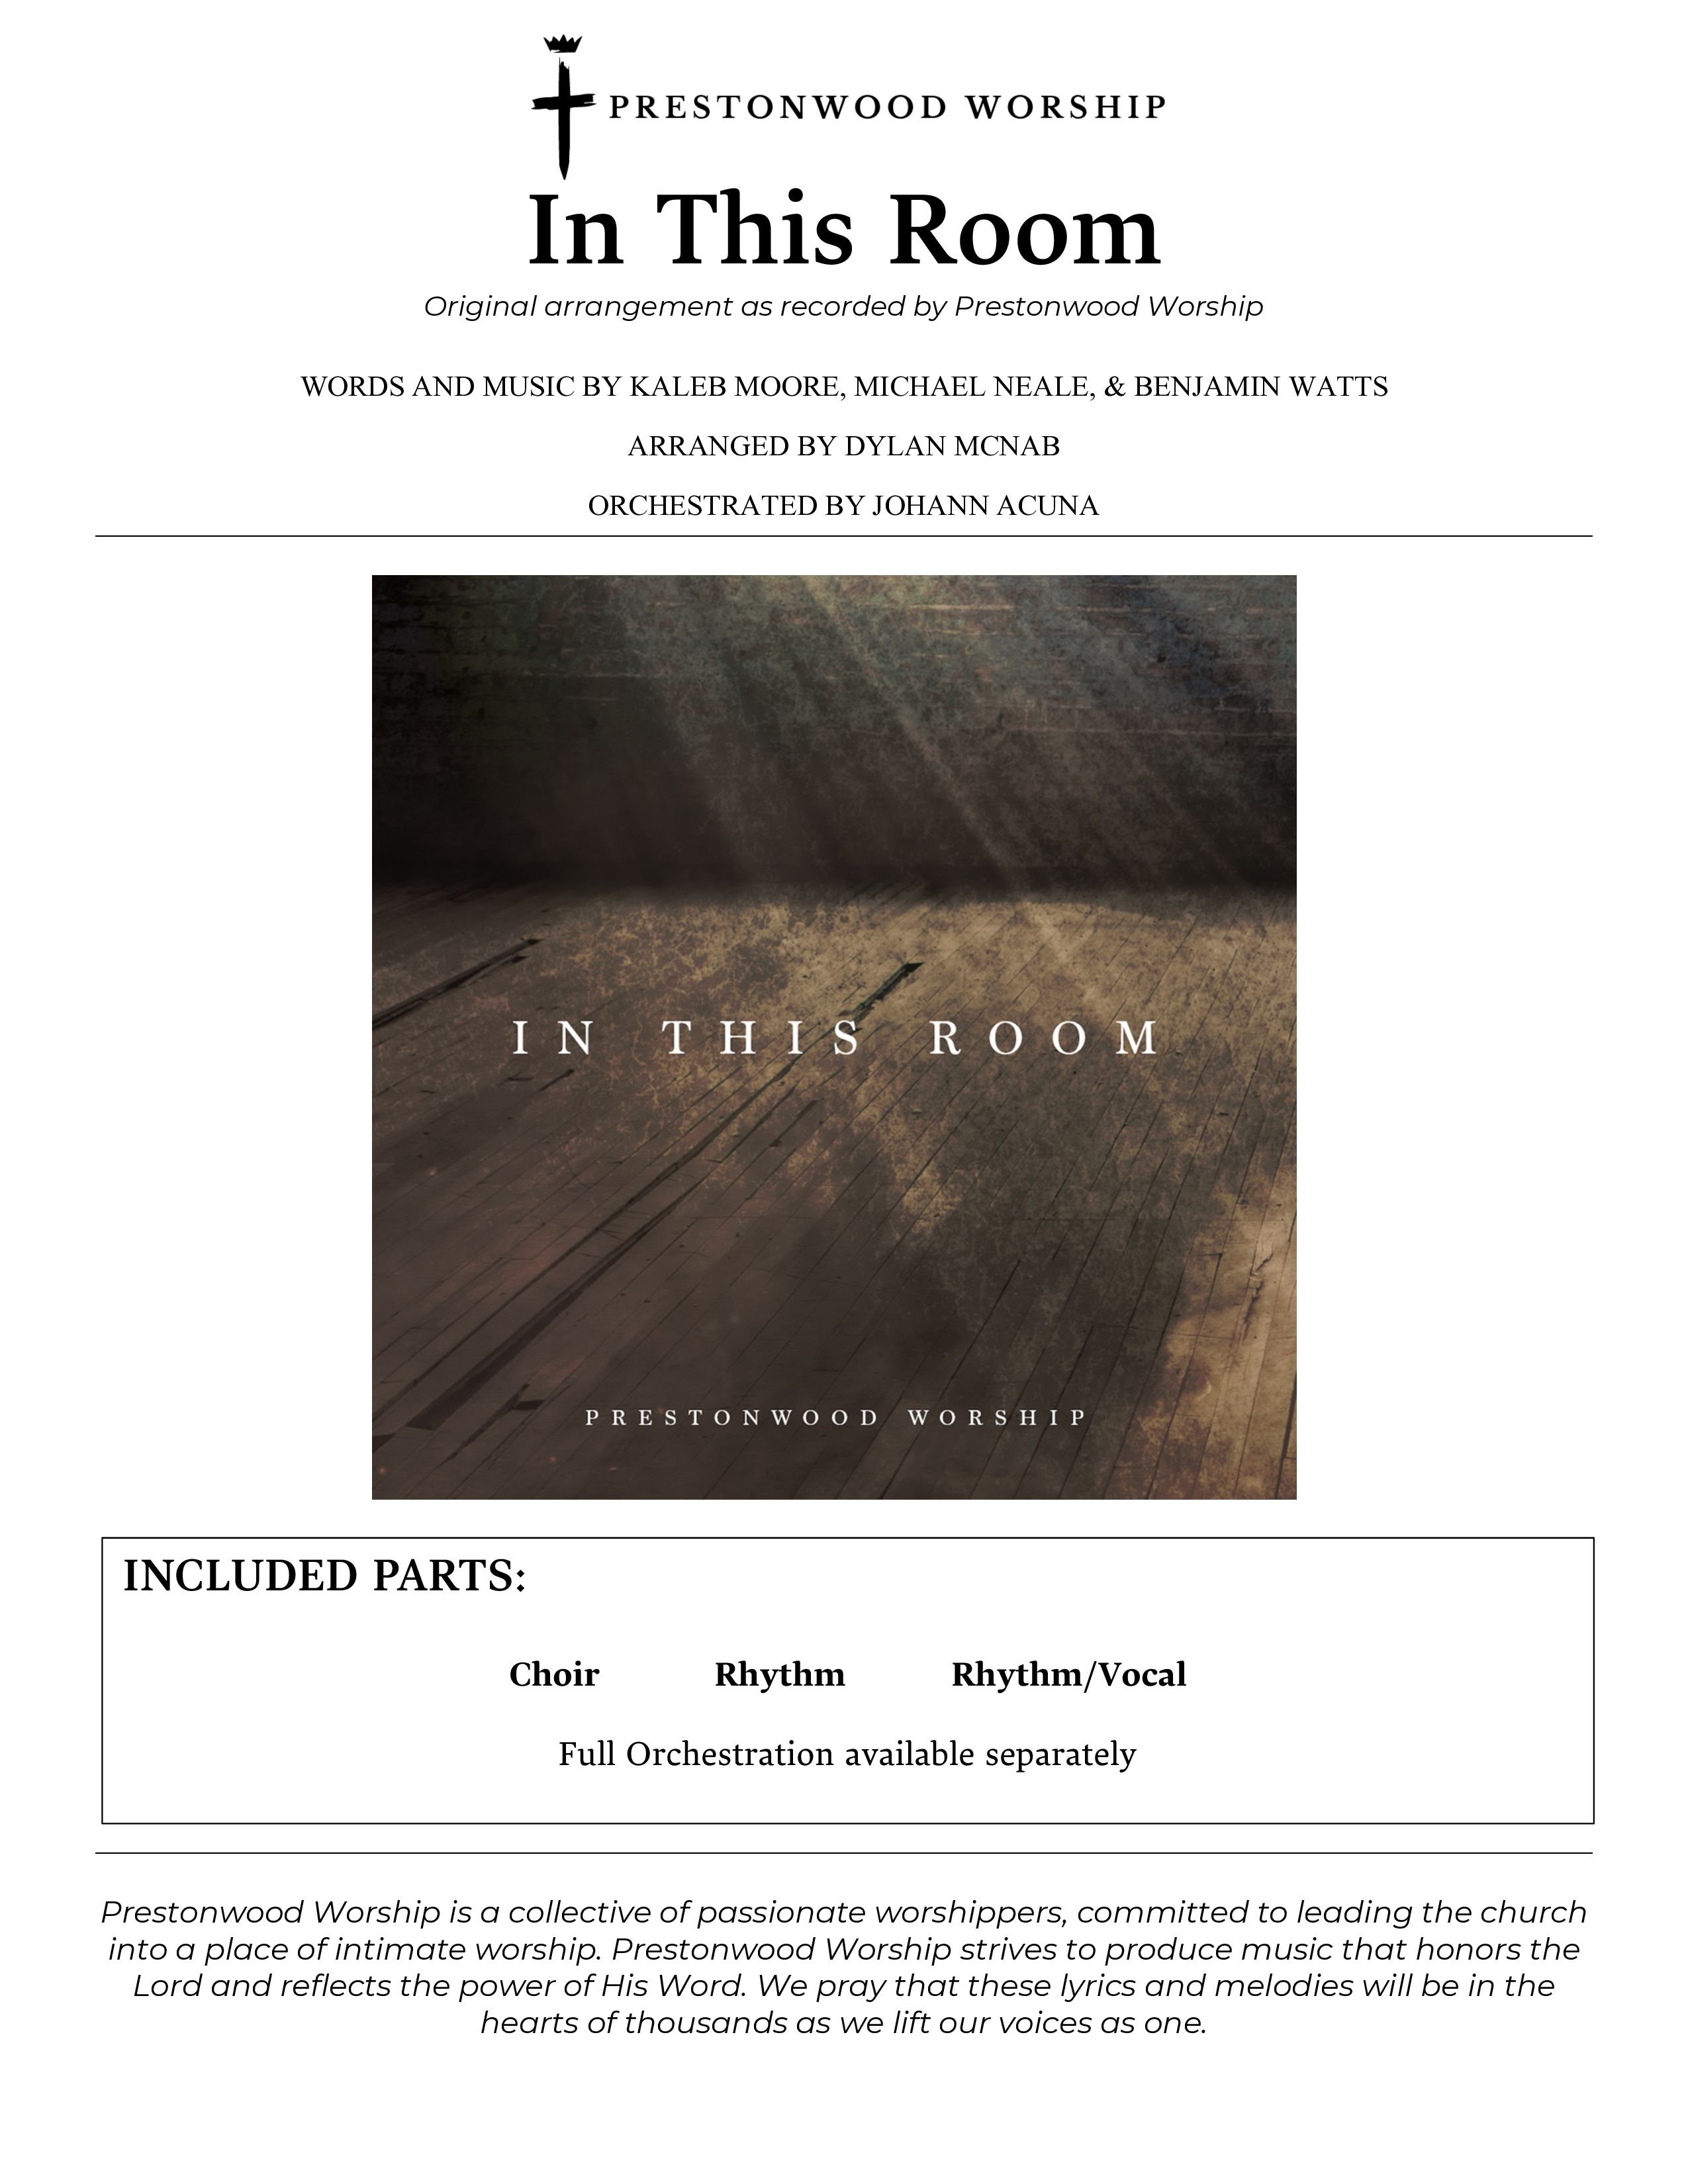 In This Room Choral Vocal Parts (Prestonwood Worship / Arr. Dylan McNab / Orch. Johann Acuna)